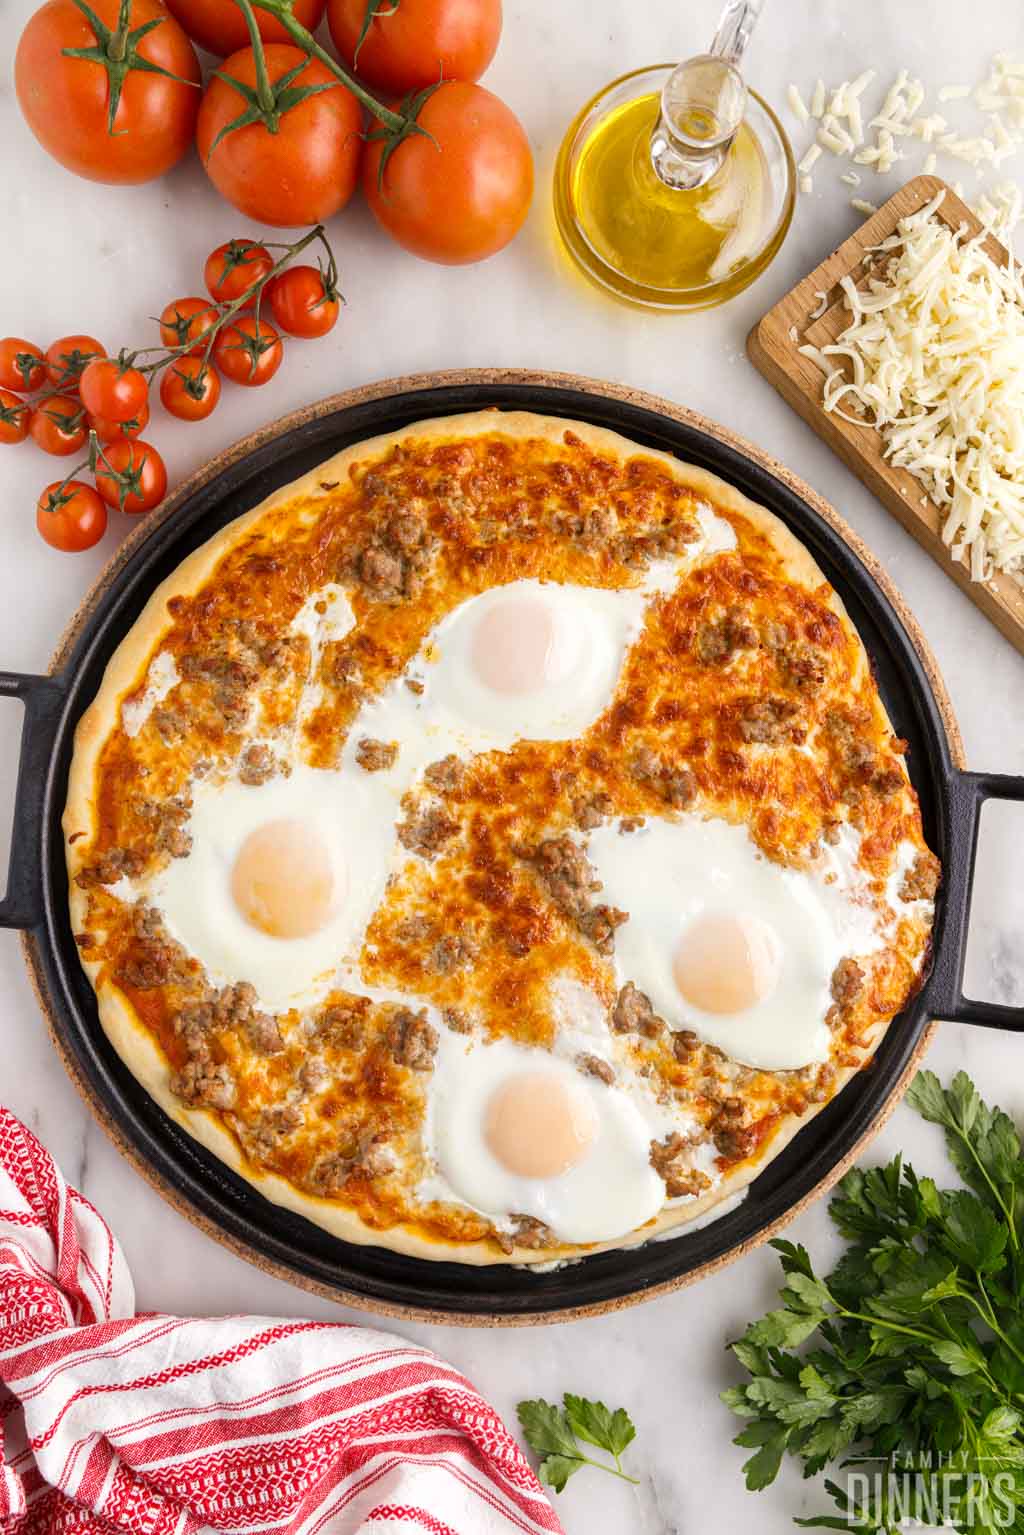 Cooked sunny side up eggs on sausage breakfast pizza.